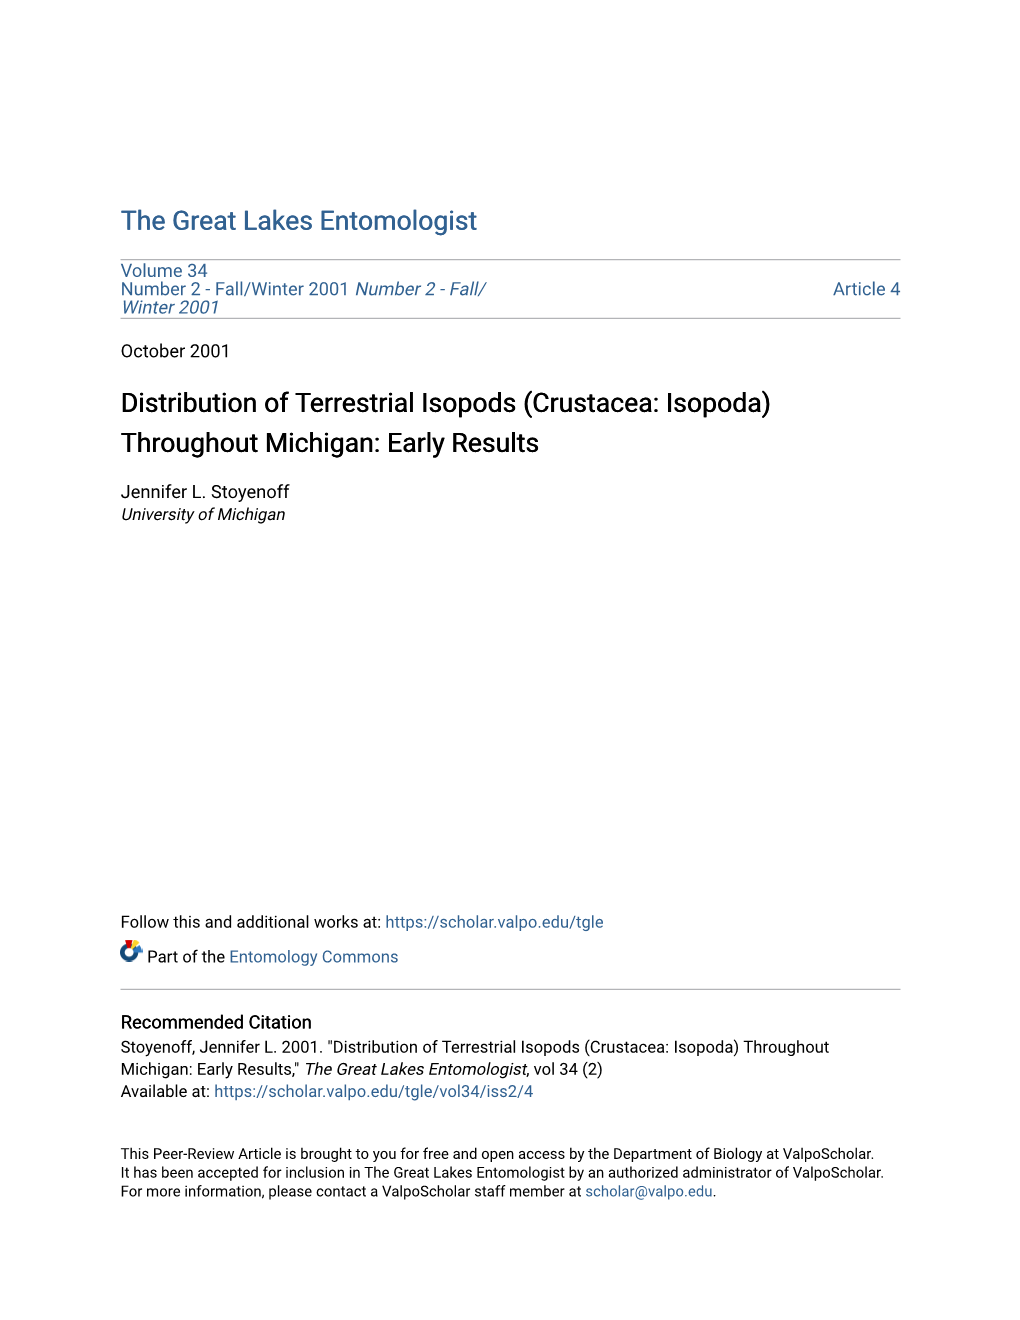 Distribution of Terrestrial Isopods (Crustacea: Isopoda) Throughout Michigan: Early Results